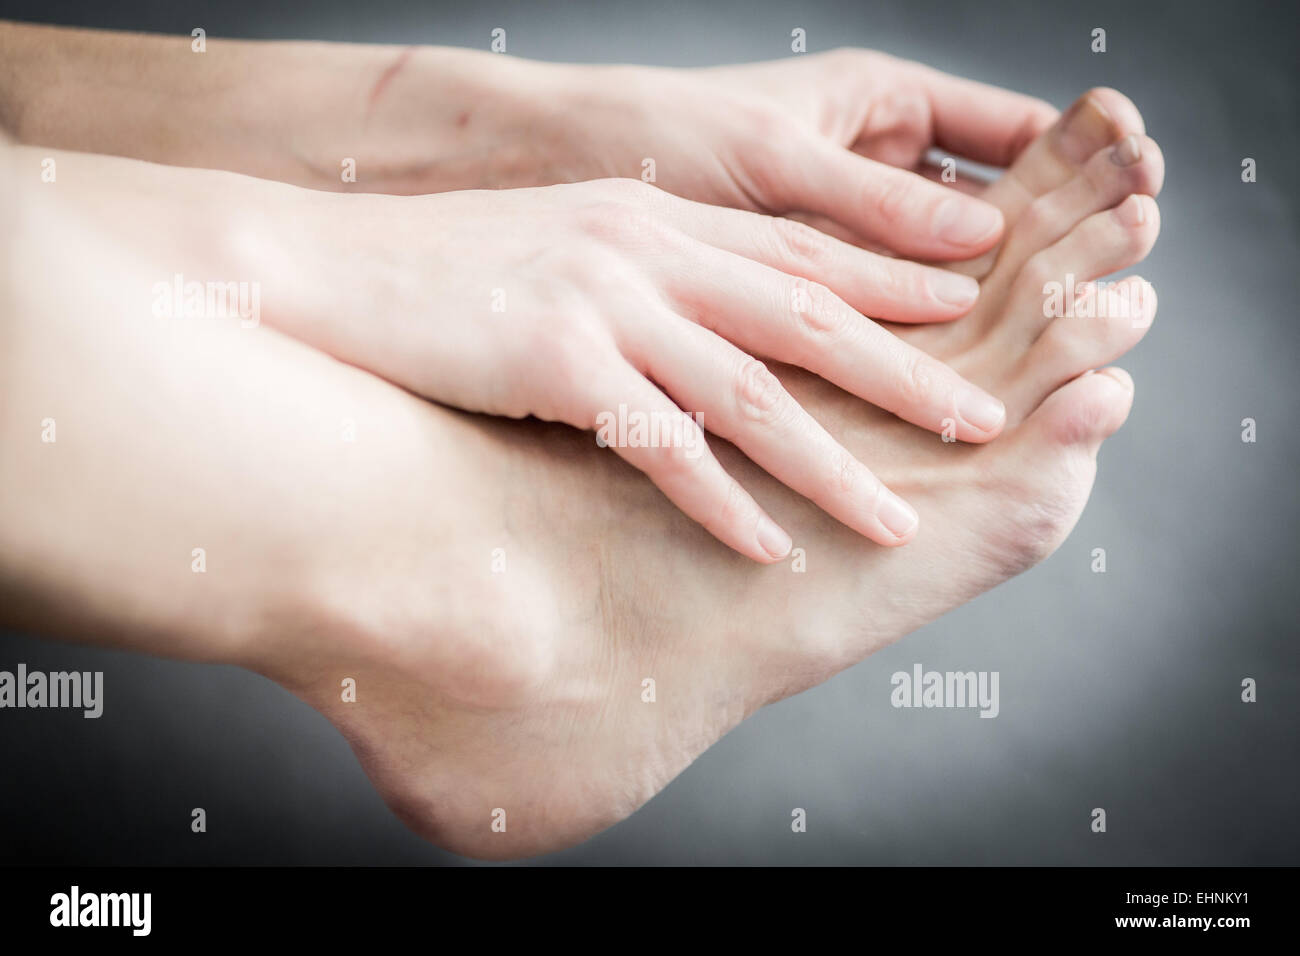 Woman suffering from an articular pain in the foot. Stock Photo